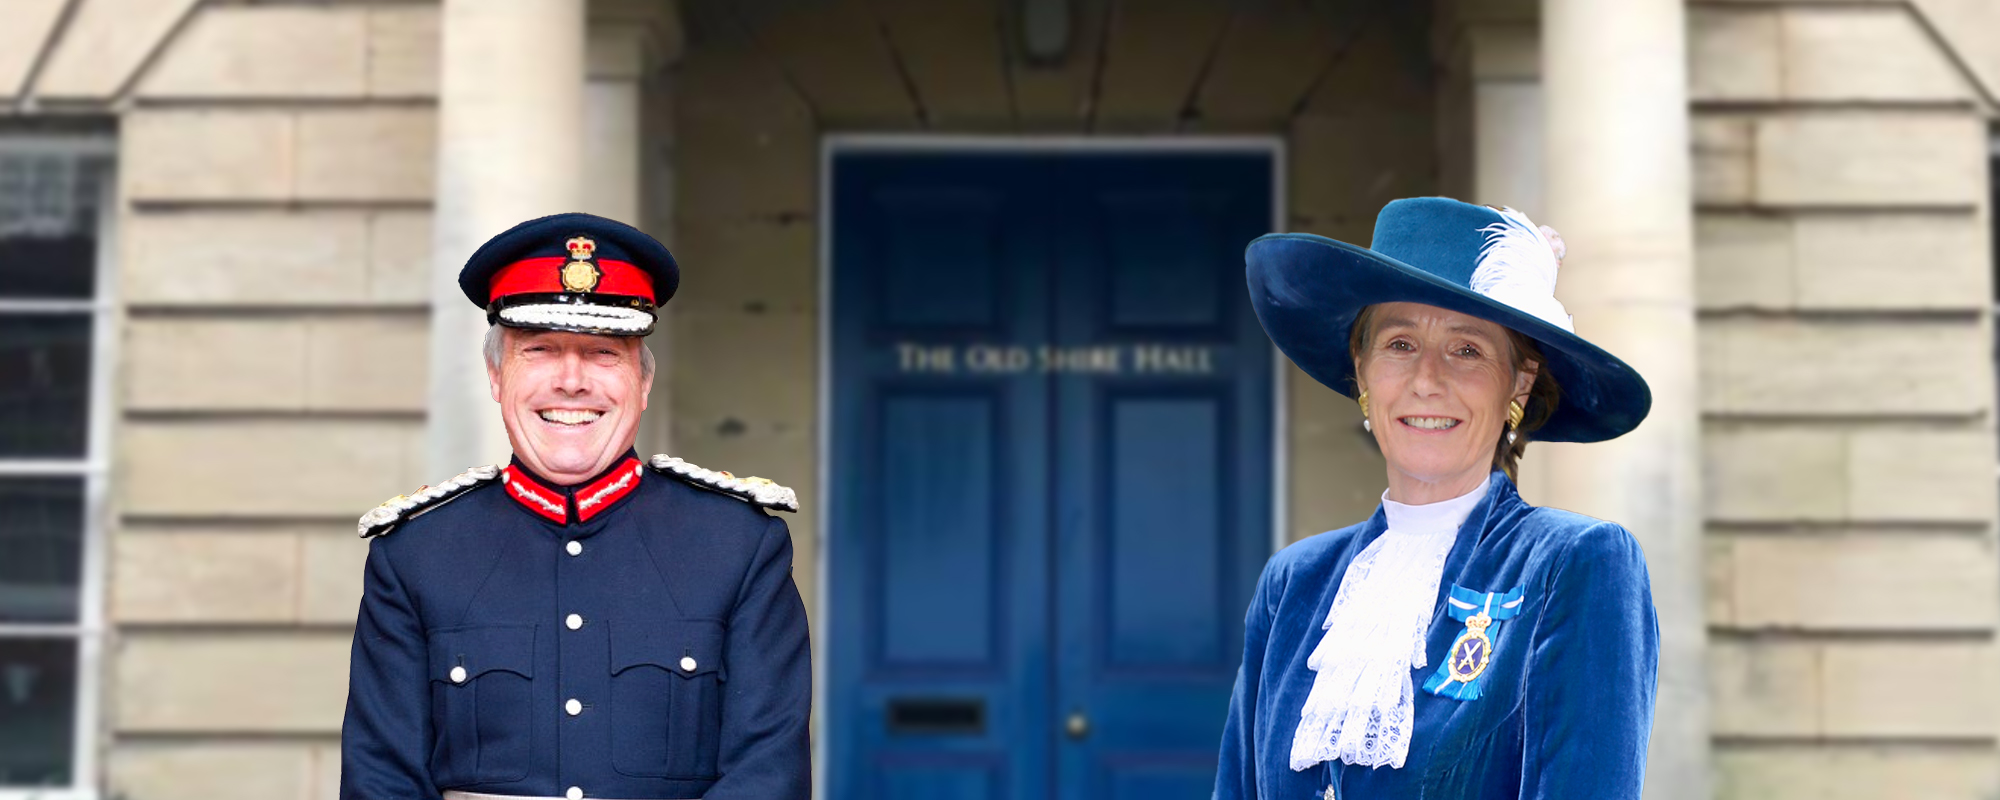 Inauguration of a New High Sheriff 2021 Featured Image